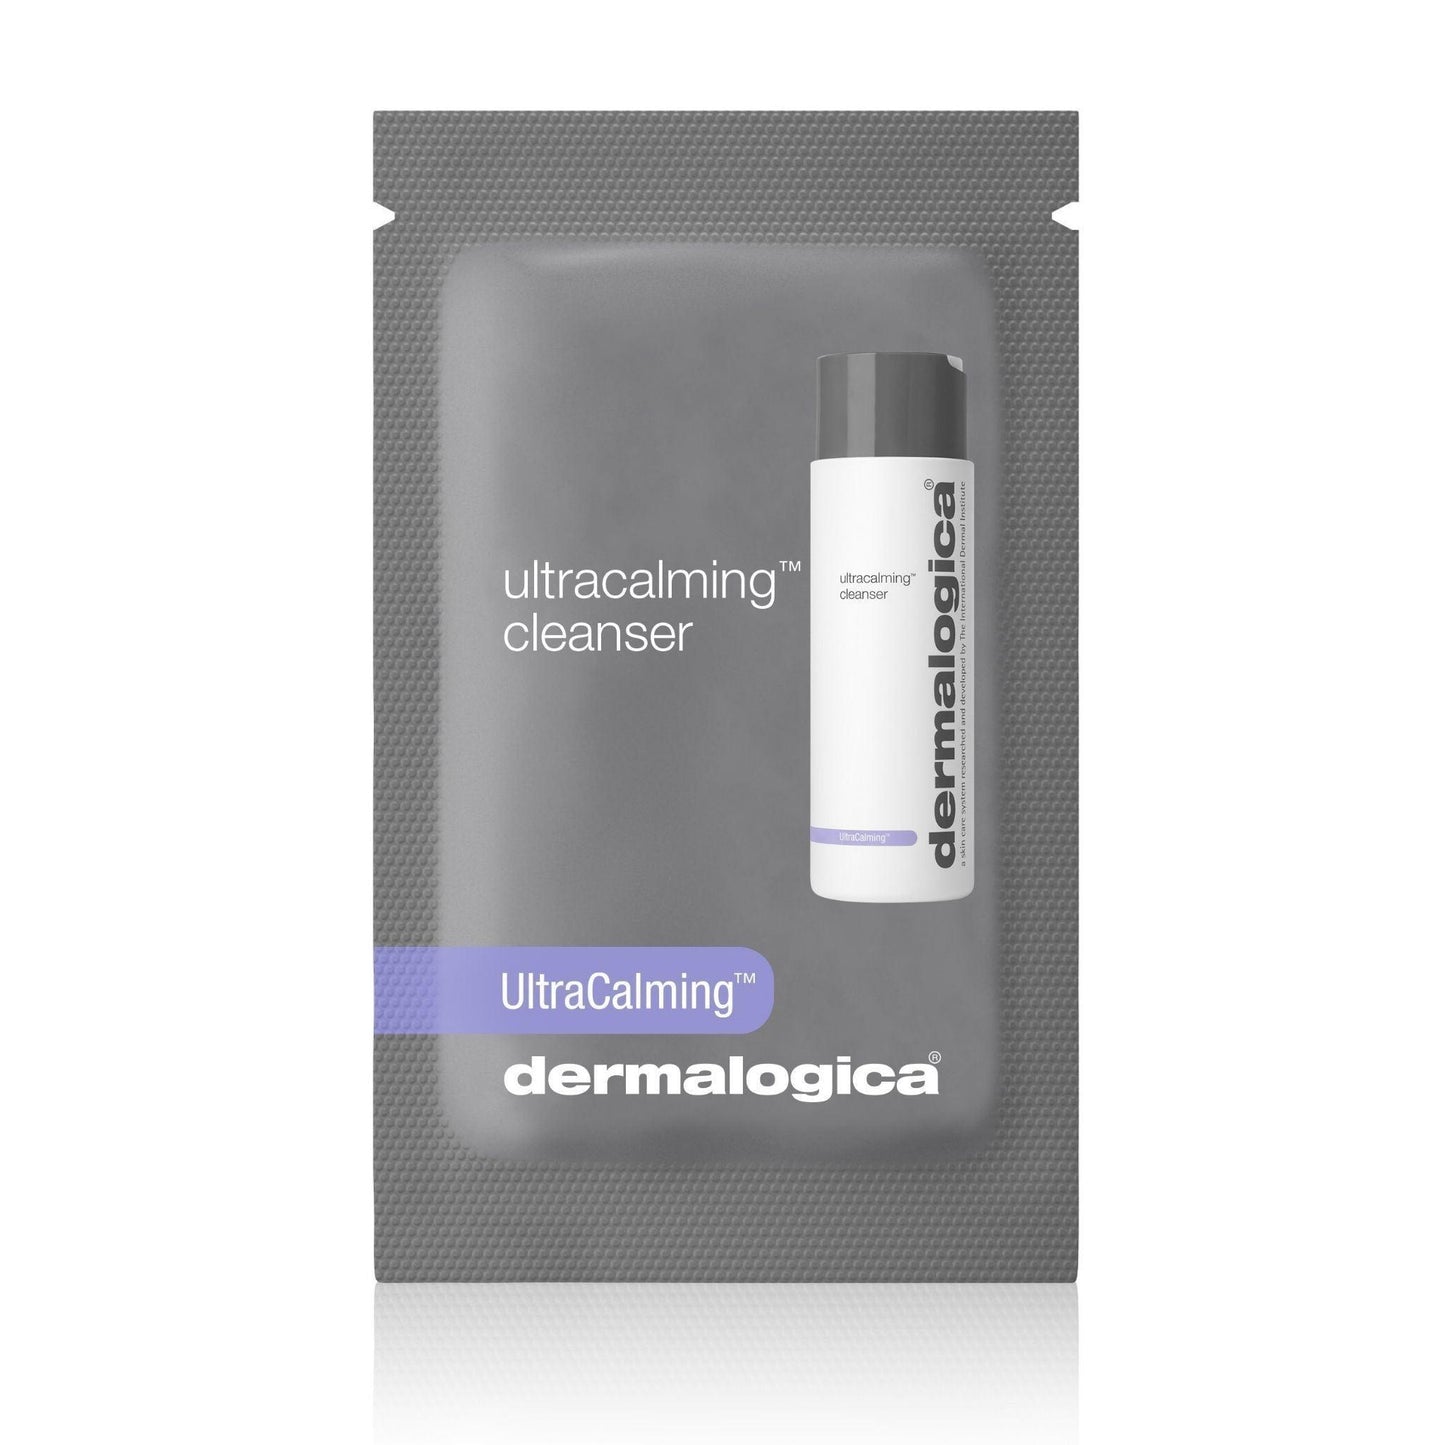 ultracalming cleanser (sample) - Dermalogica Singapore